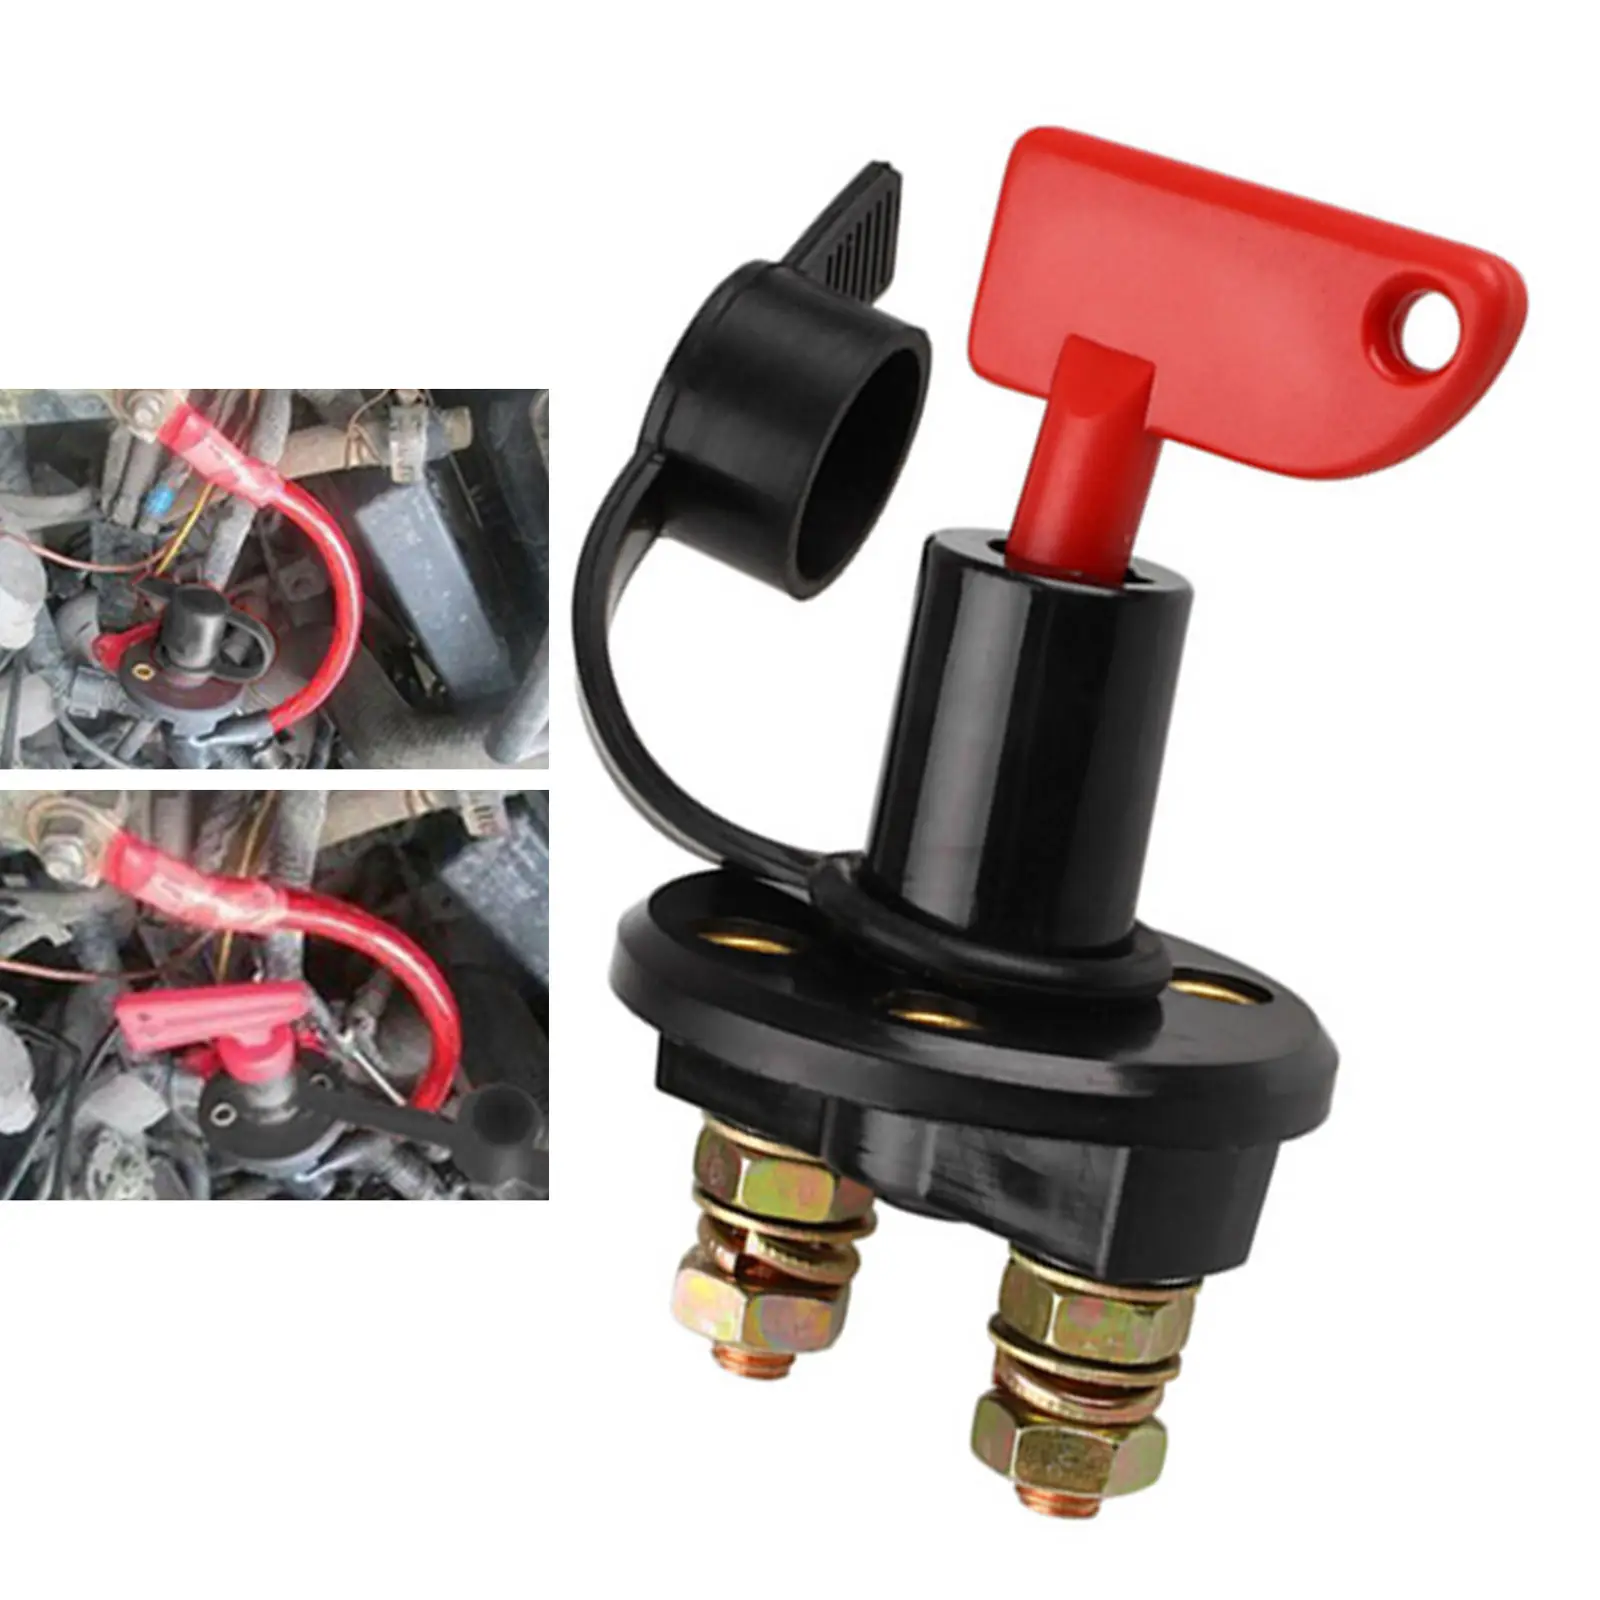 Durable Battery Disconnect Switch, Isolator Cut Off Power Kill Master Battery Switch for Marine Car Boats RV ATV Vehicles